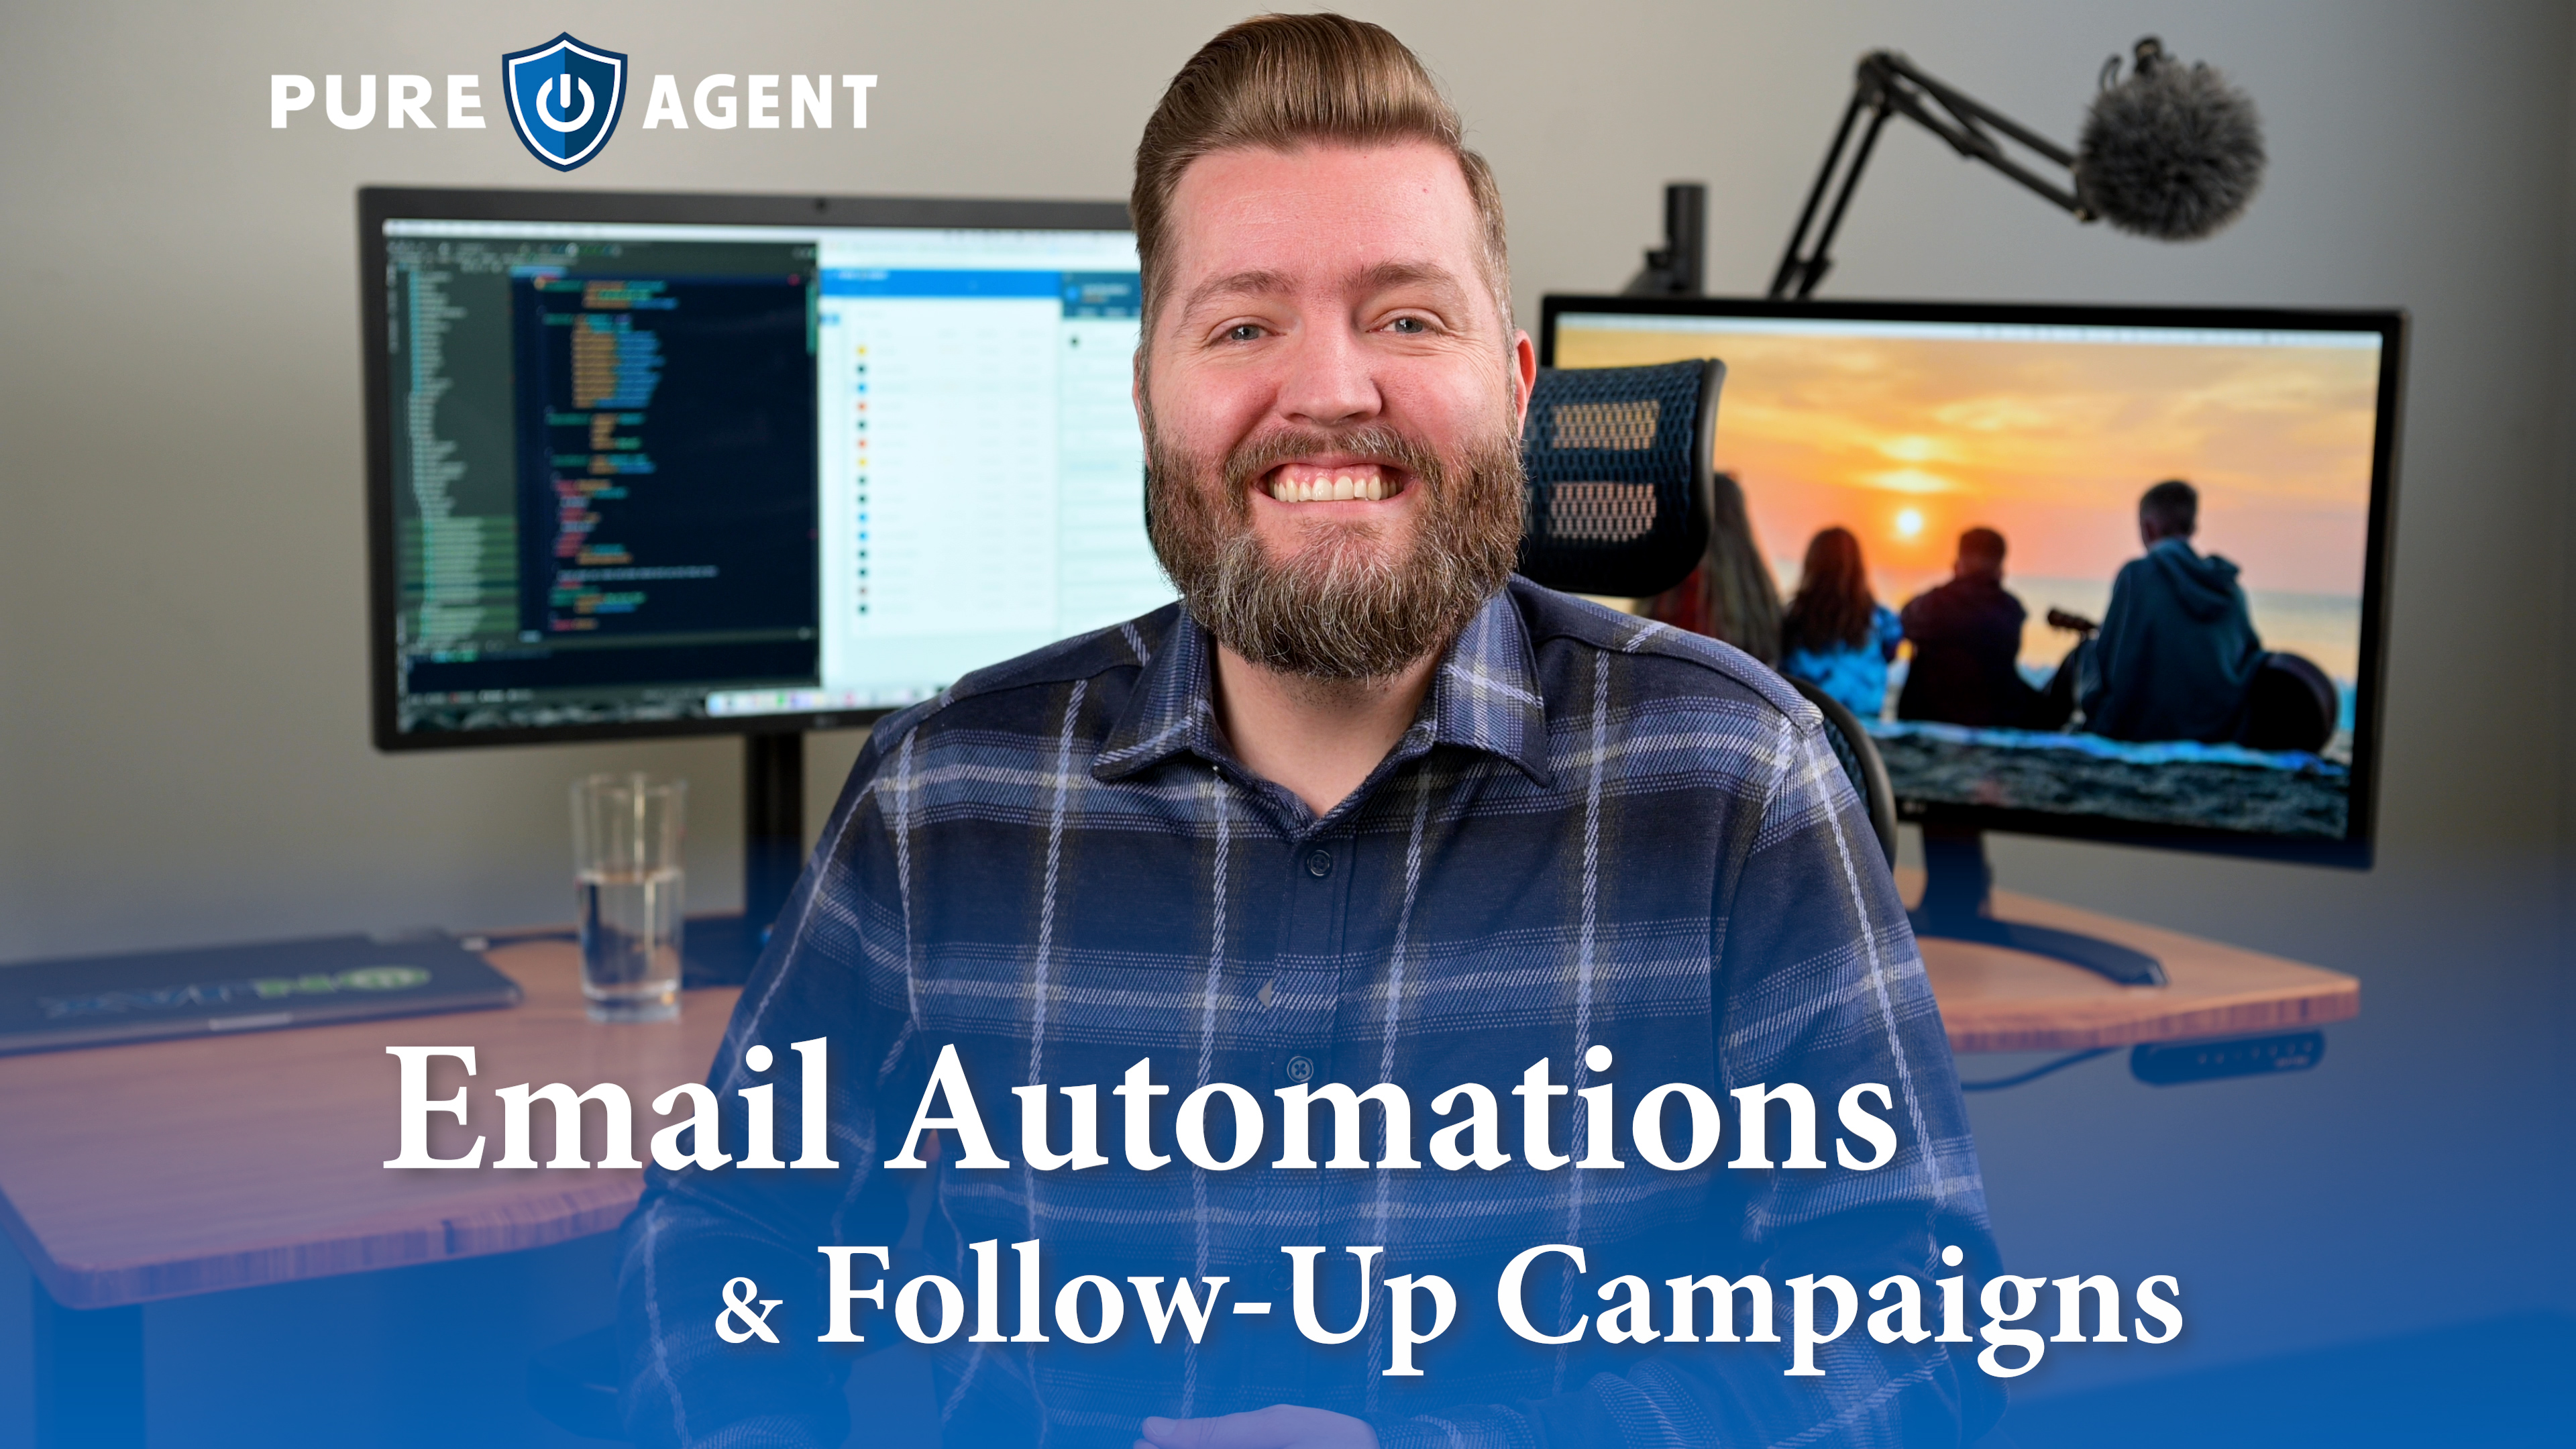 How To Video - Email Automations & Follow-Up Campaigns